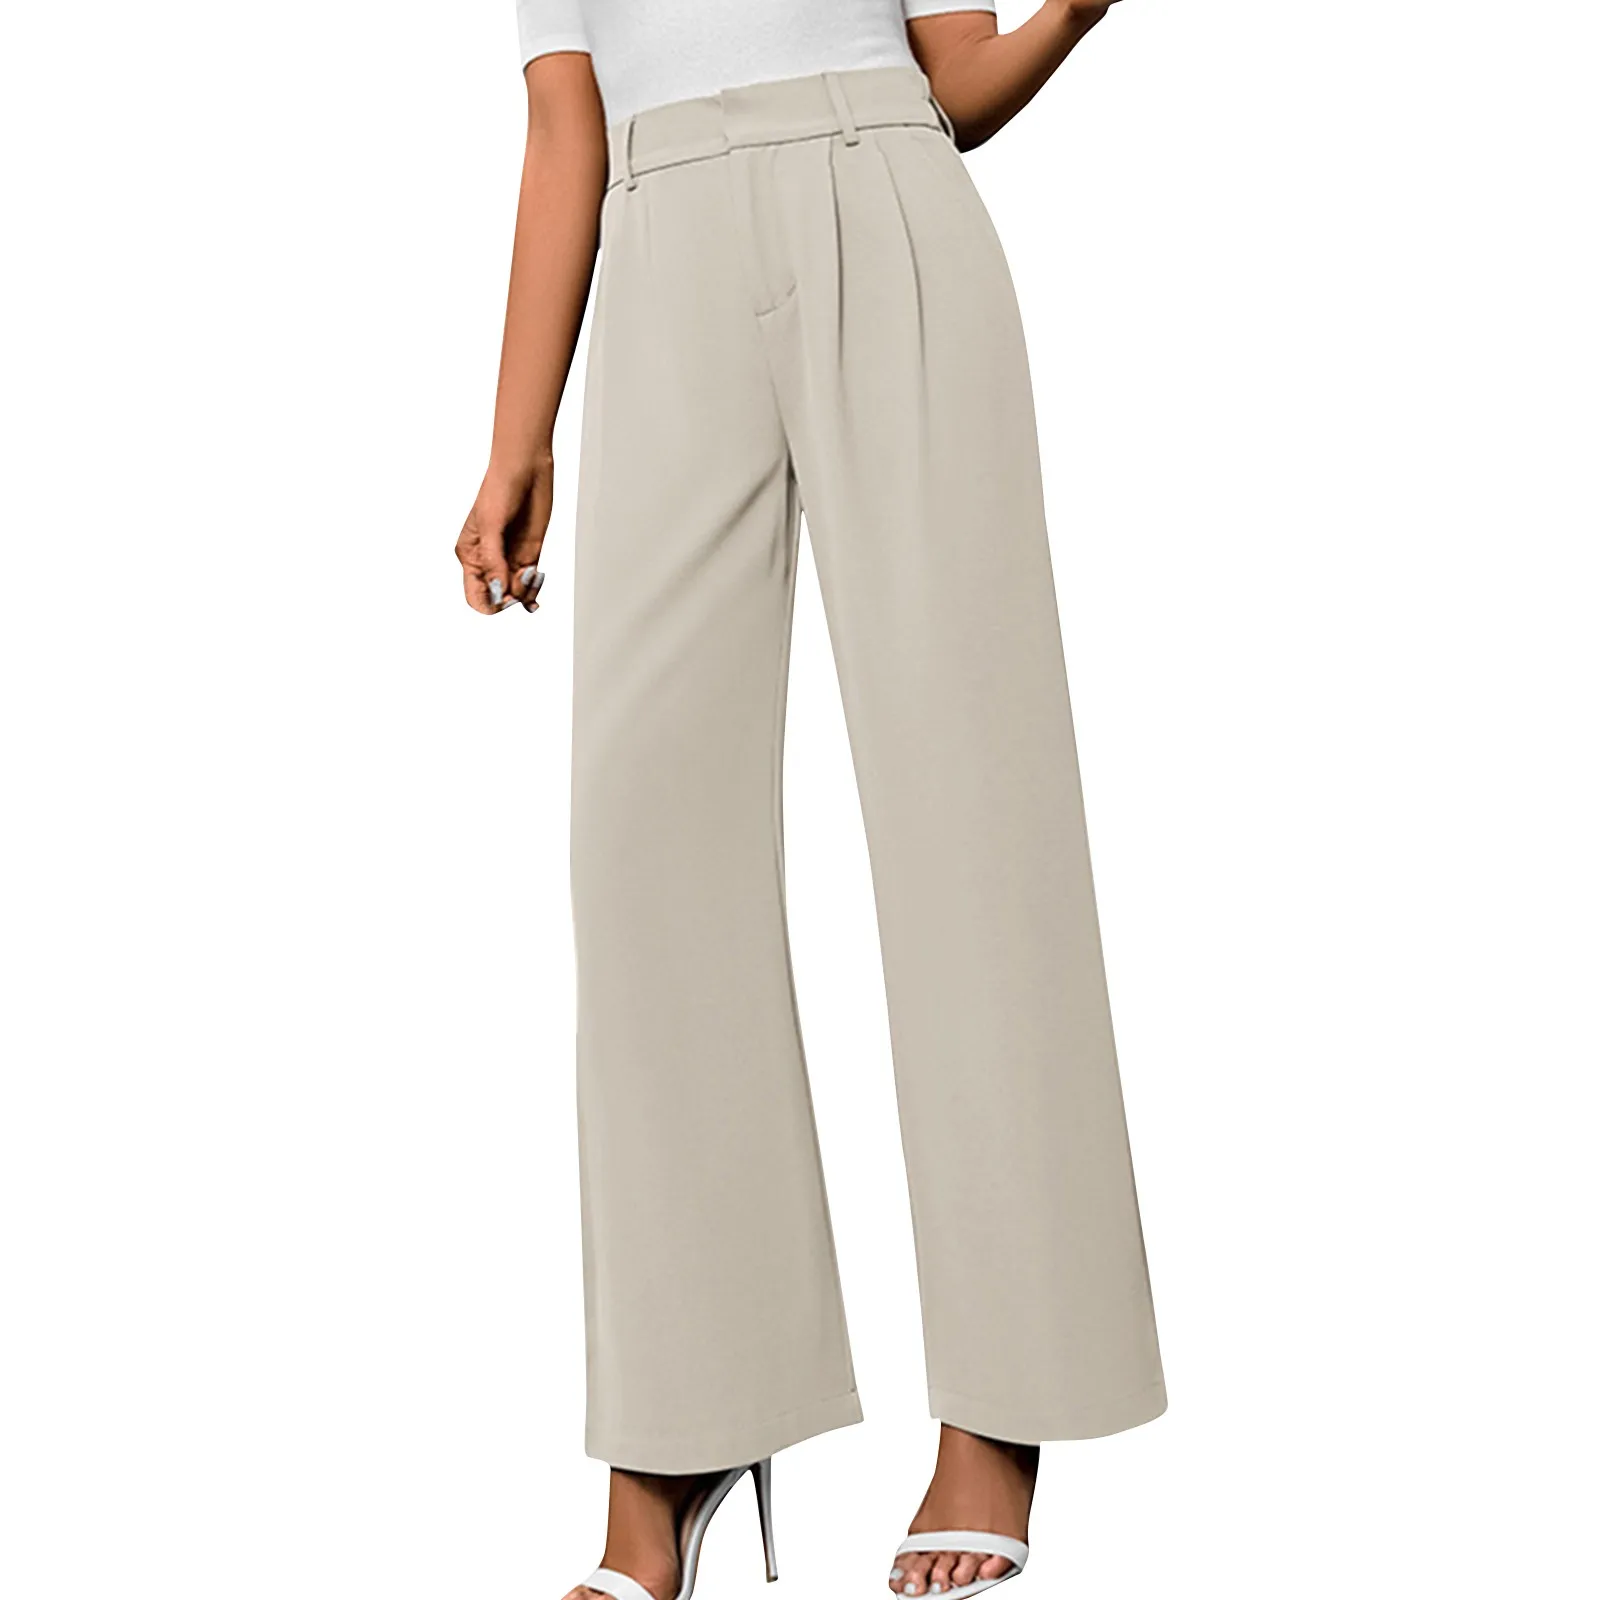 

Women's Comfortable Casual High Waisted Loose Straight Leg Wide Leg Pants Casual Trousers Sport ropa mujer pantalon femme 여성바지